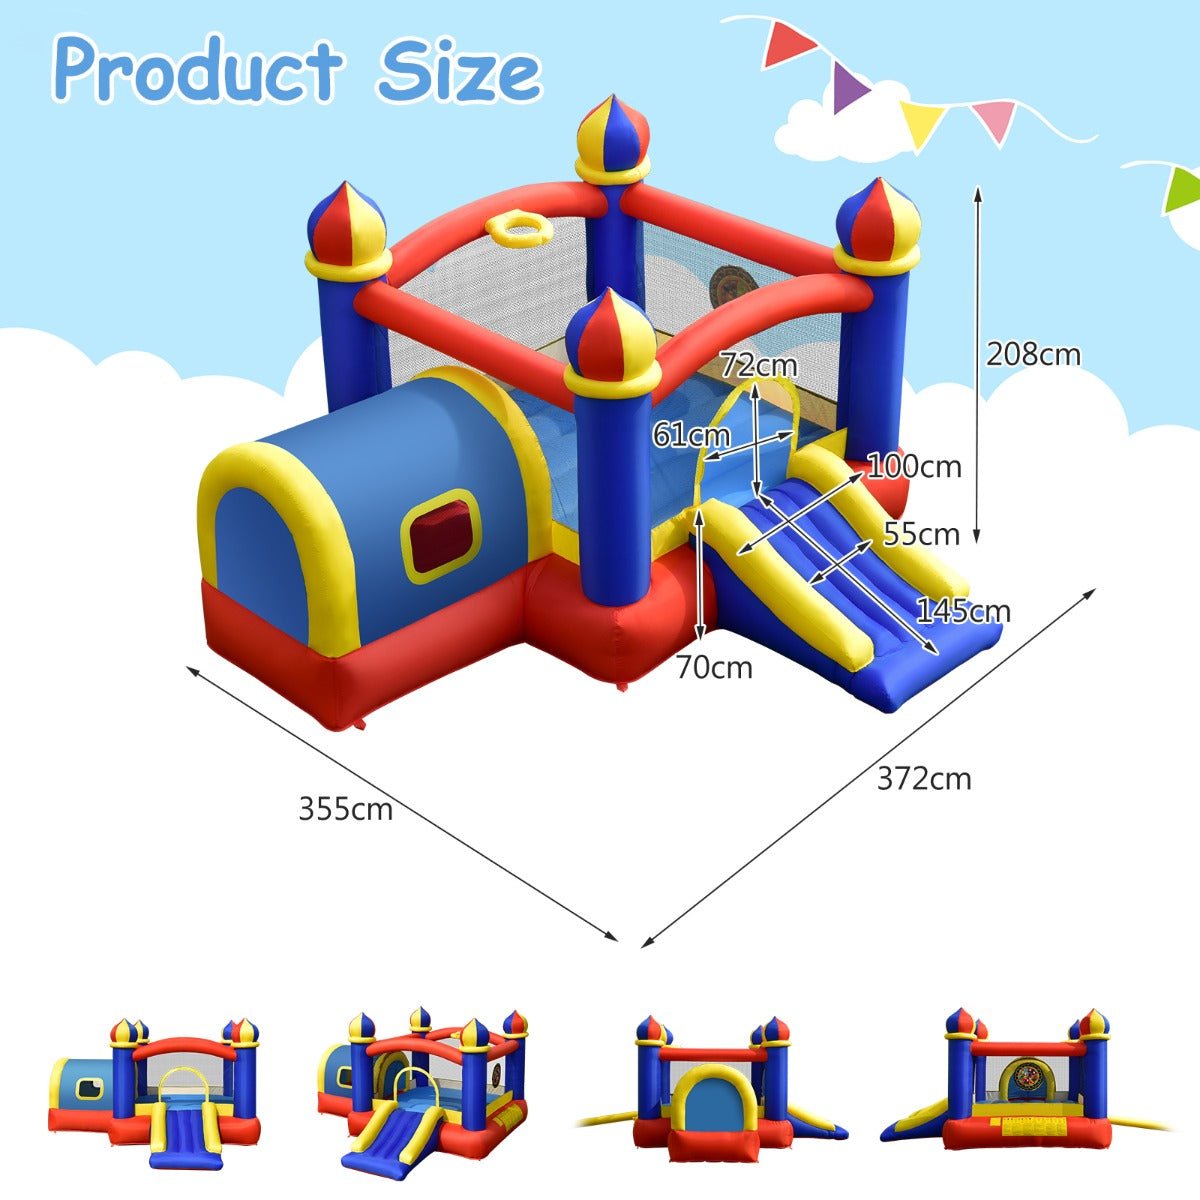 5-in-1 Jumping Castle for Kids - Slide & Play Zone (Blower Not Included)